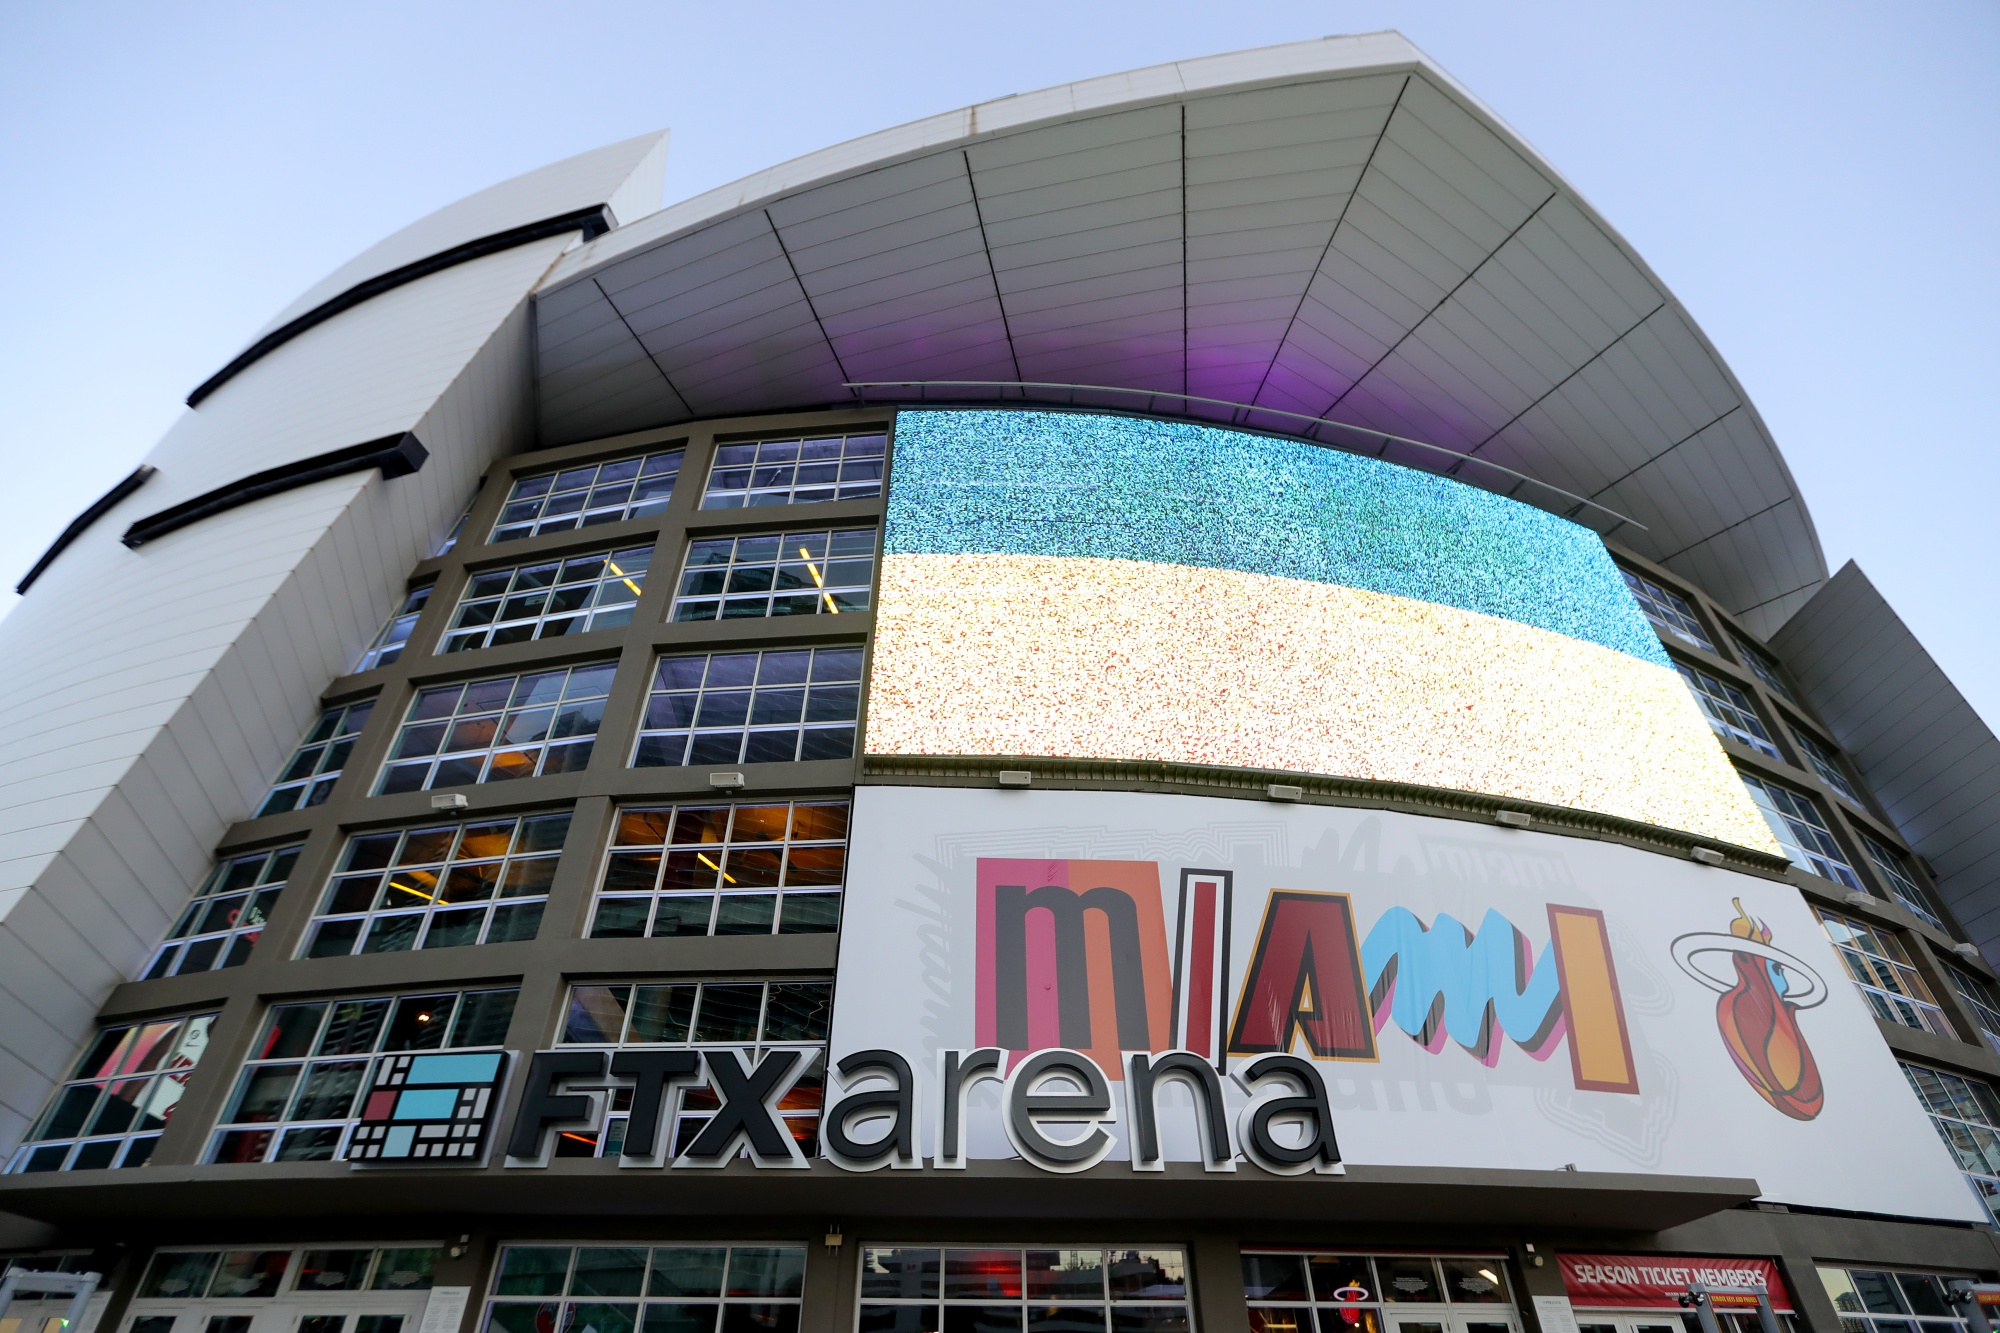 Browse thousands of Miami Heat images for design inspiration